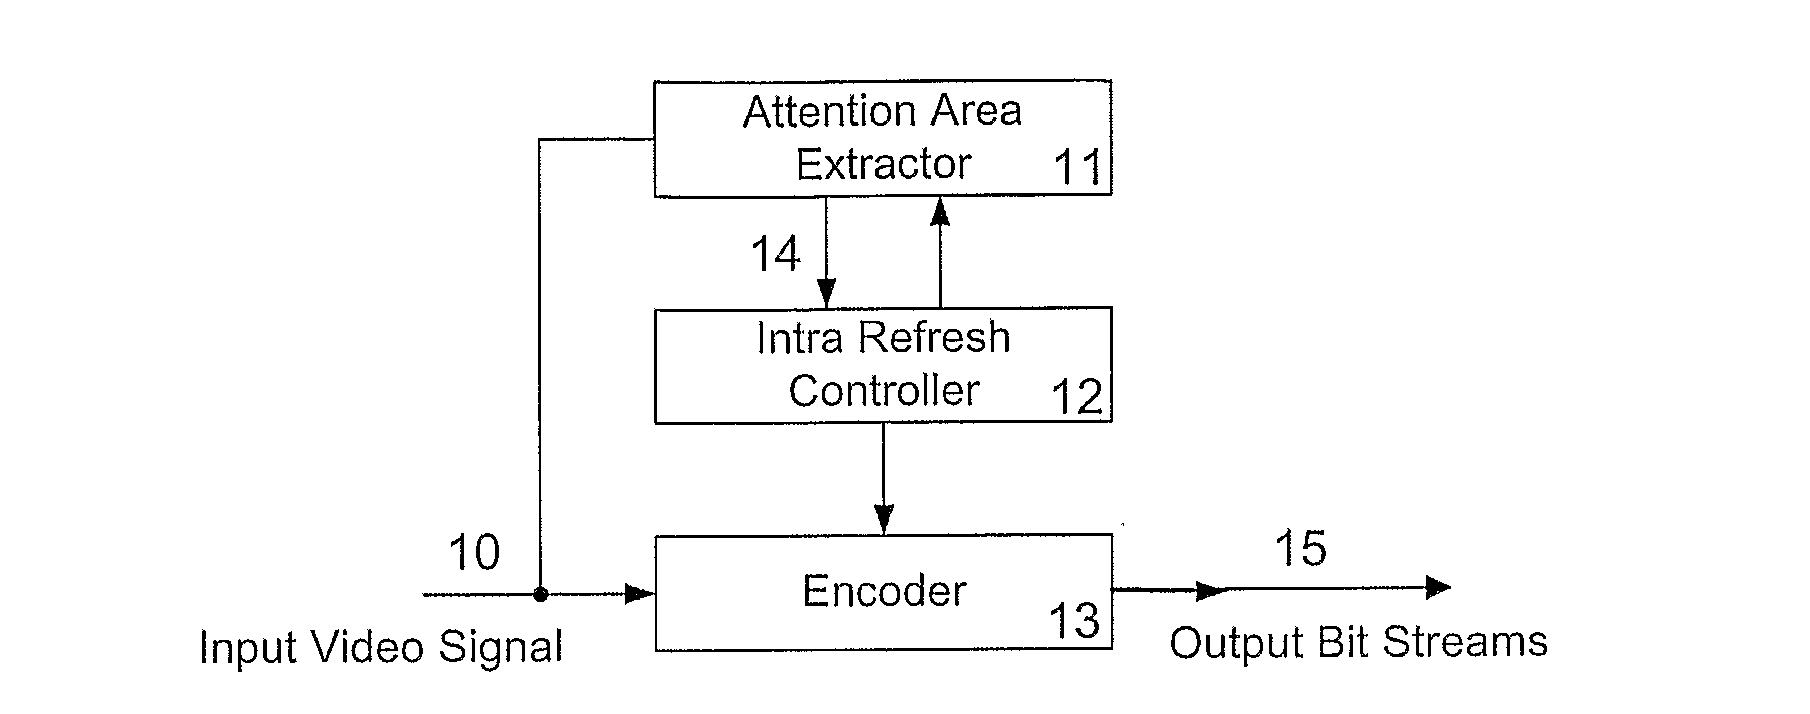 Method and Apparatus for Adaptively Determining a Bit Budget for Encoding Video Pictures